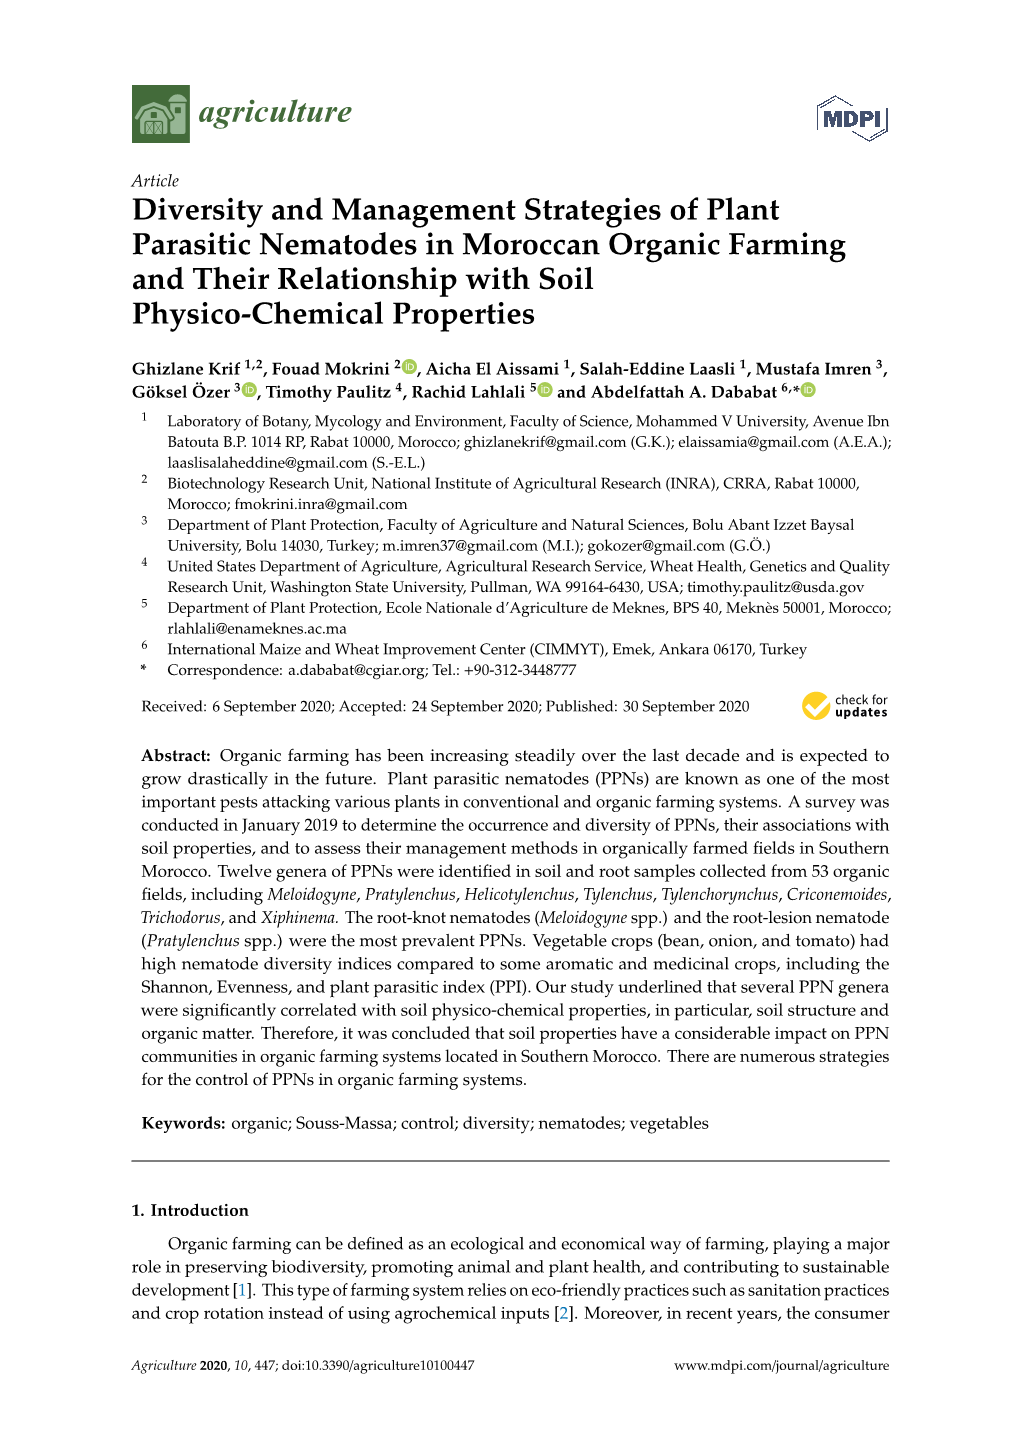 Diversity and Management Strategies of Plant Parasitic Nematodes in Moroccan Organic Farming and Their Relationship with Soil Physico-Chemical Properties